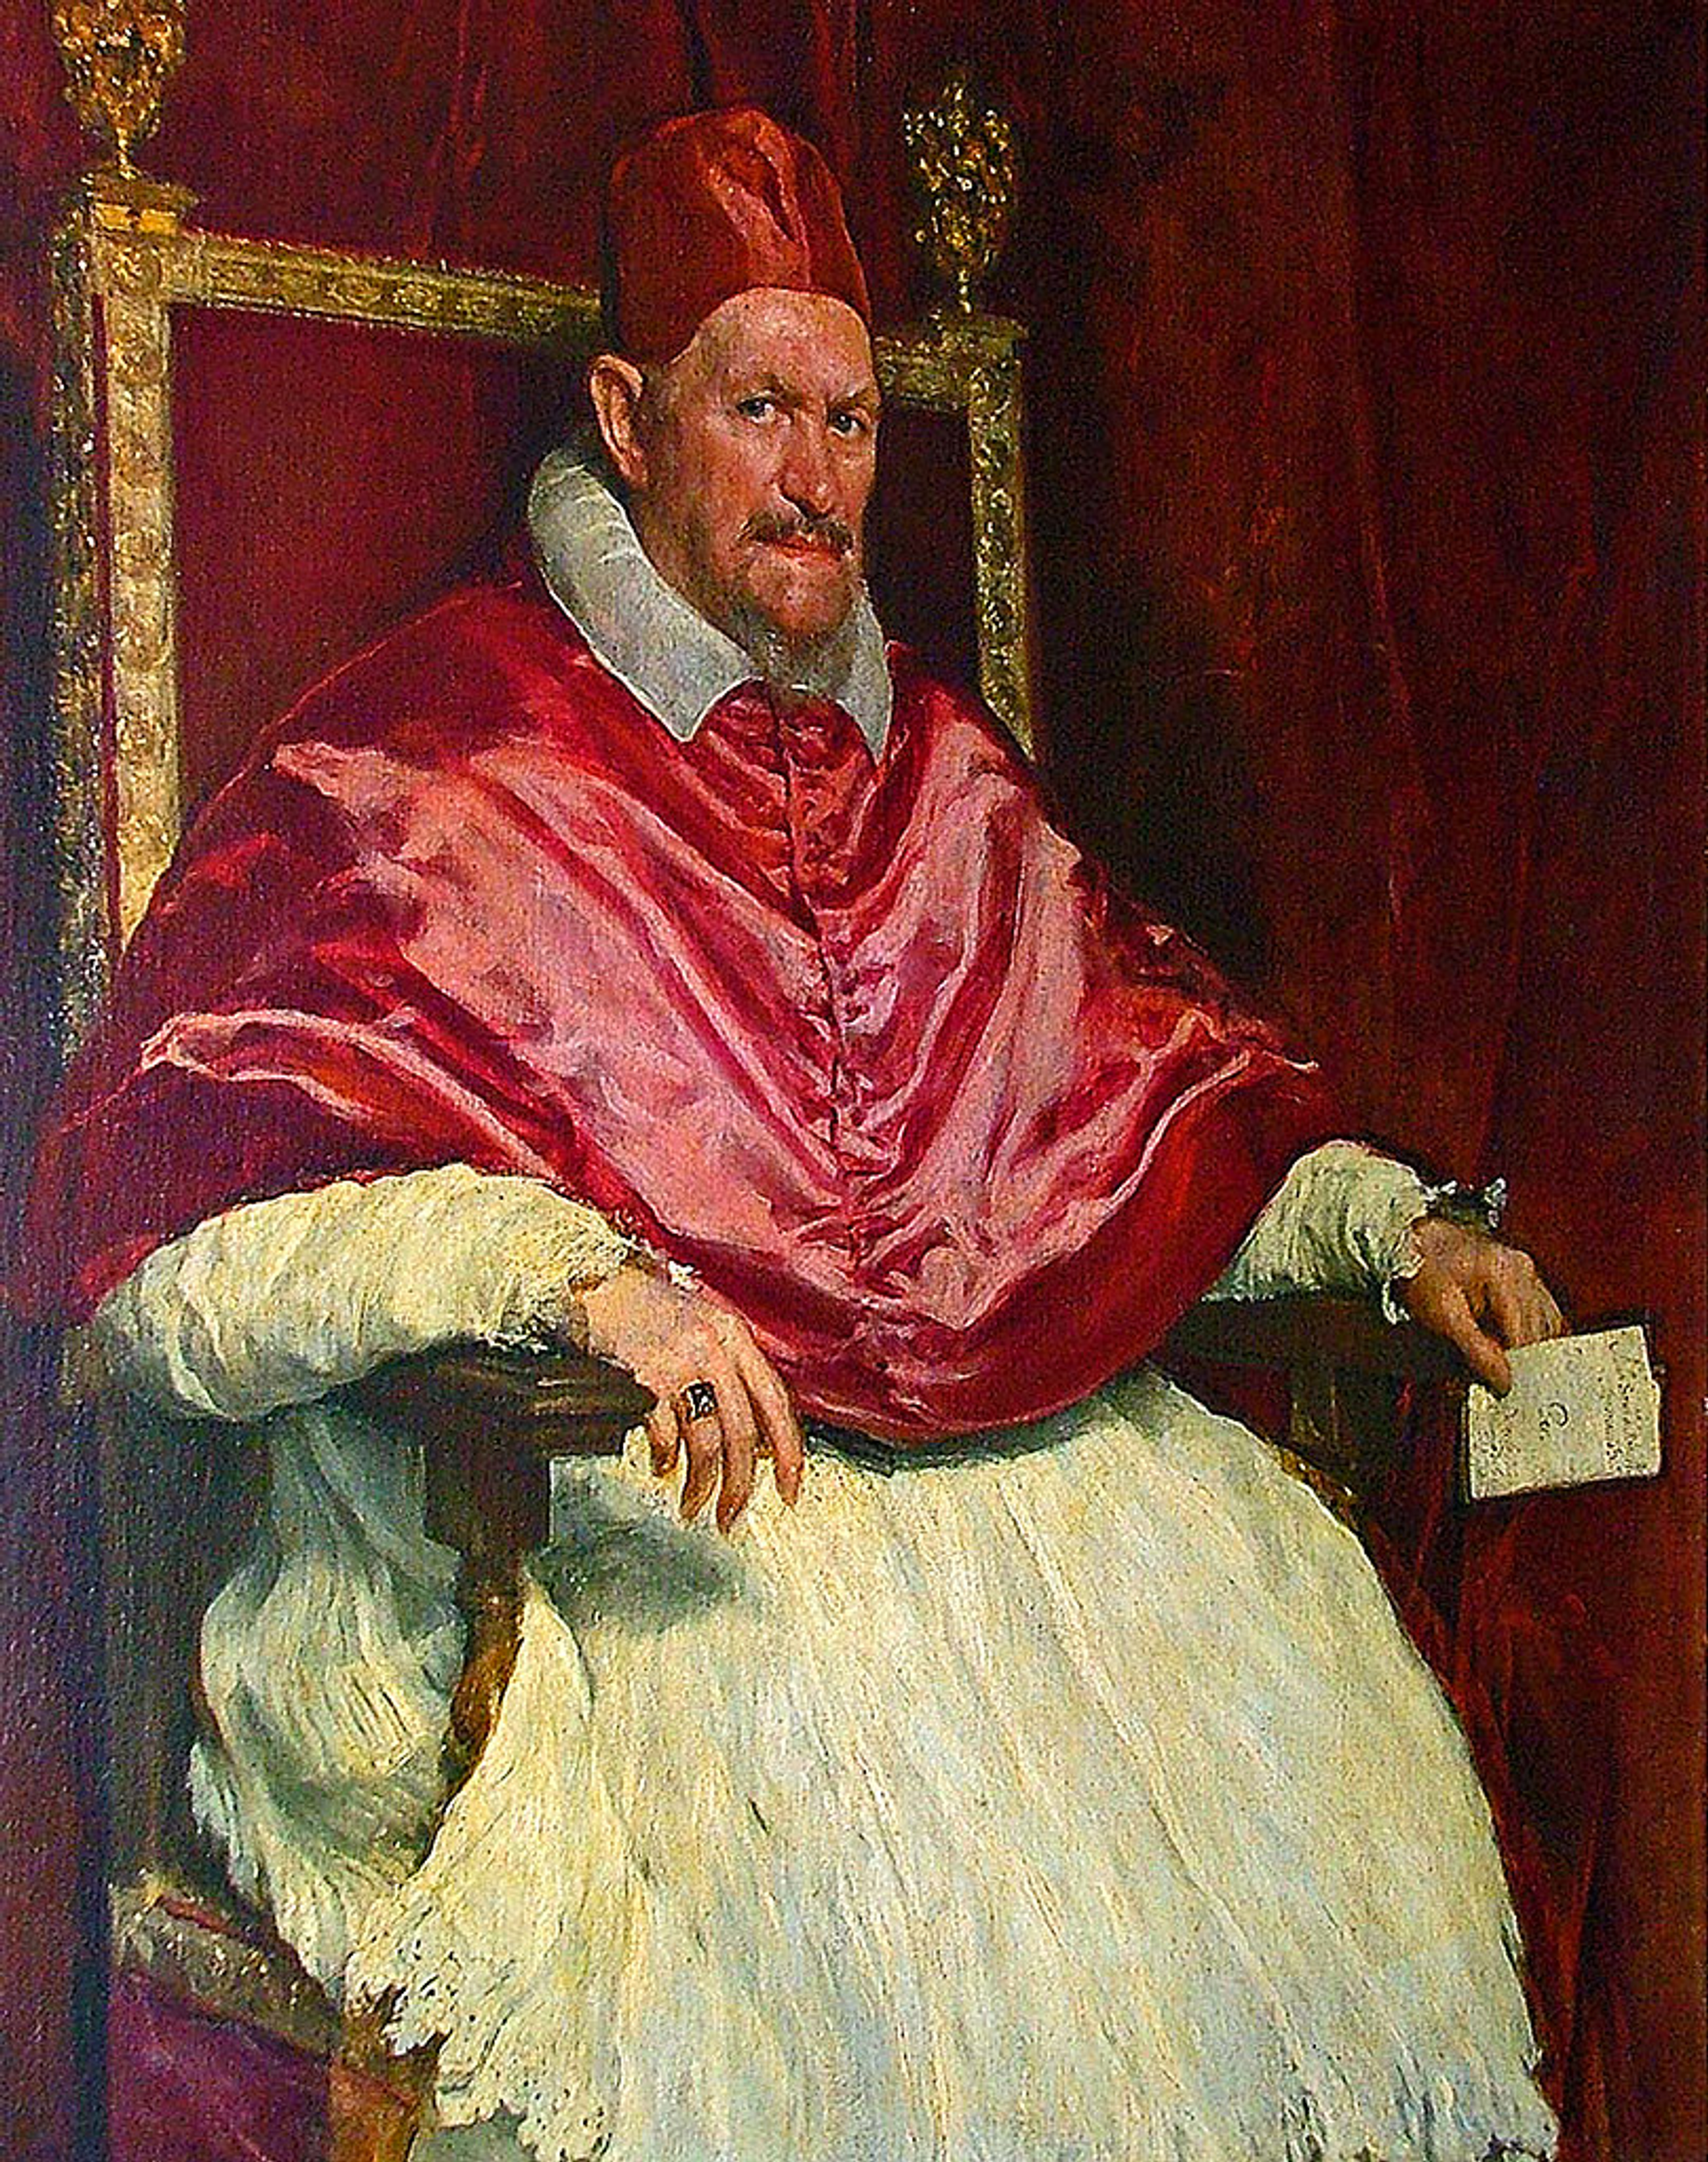 Diego Velasquez’s Portrait of Innocent X. A seated pope dressed in papal attire holding a parchment in his hand.